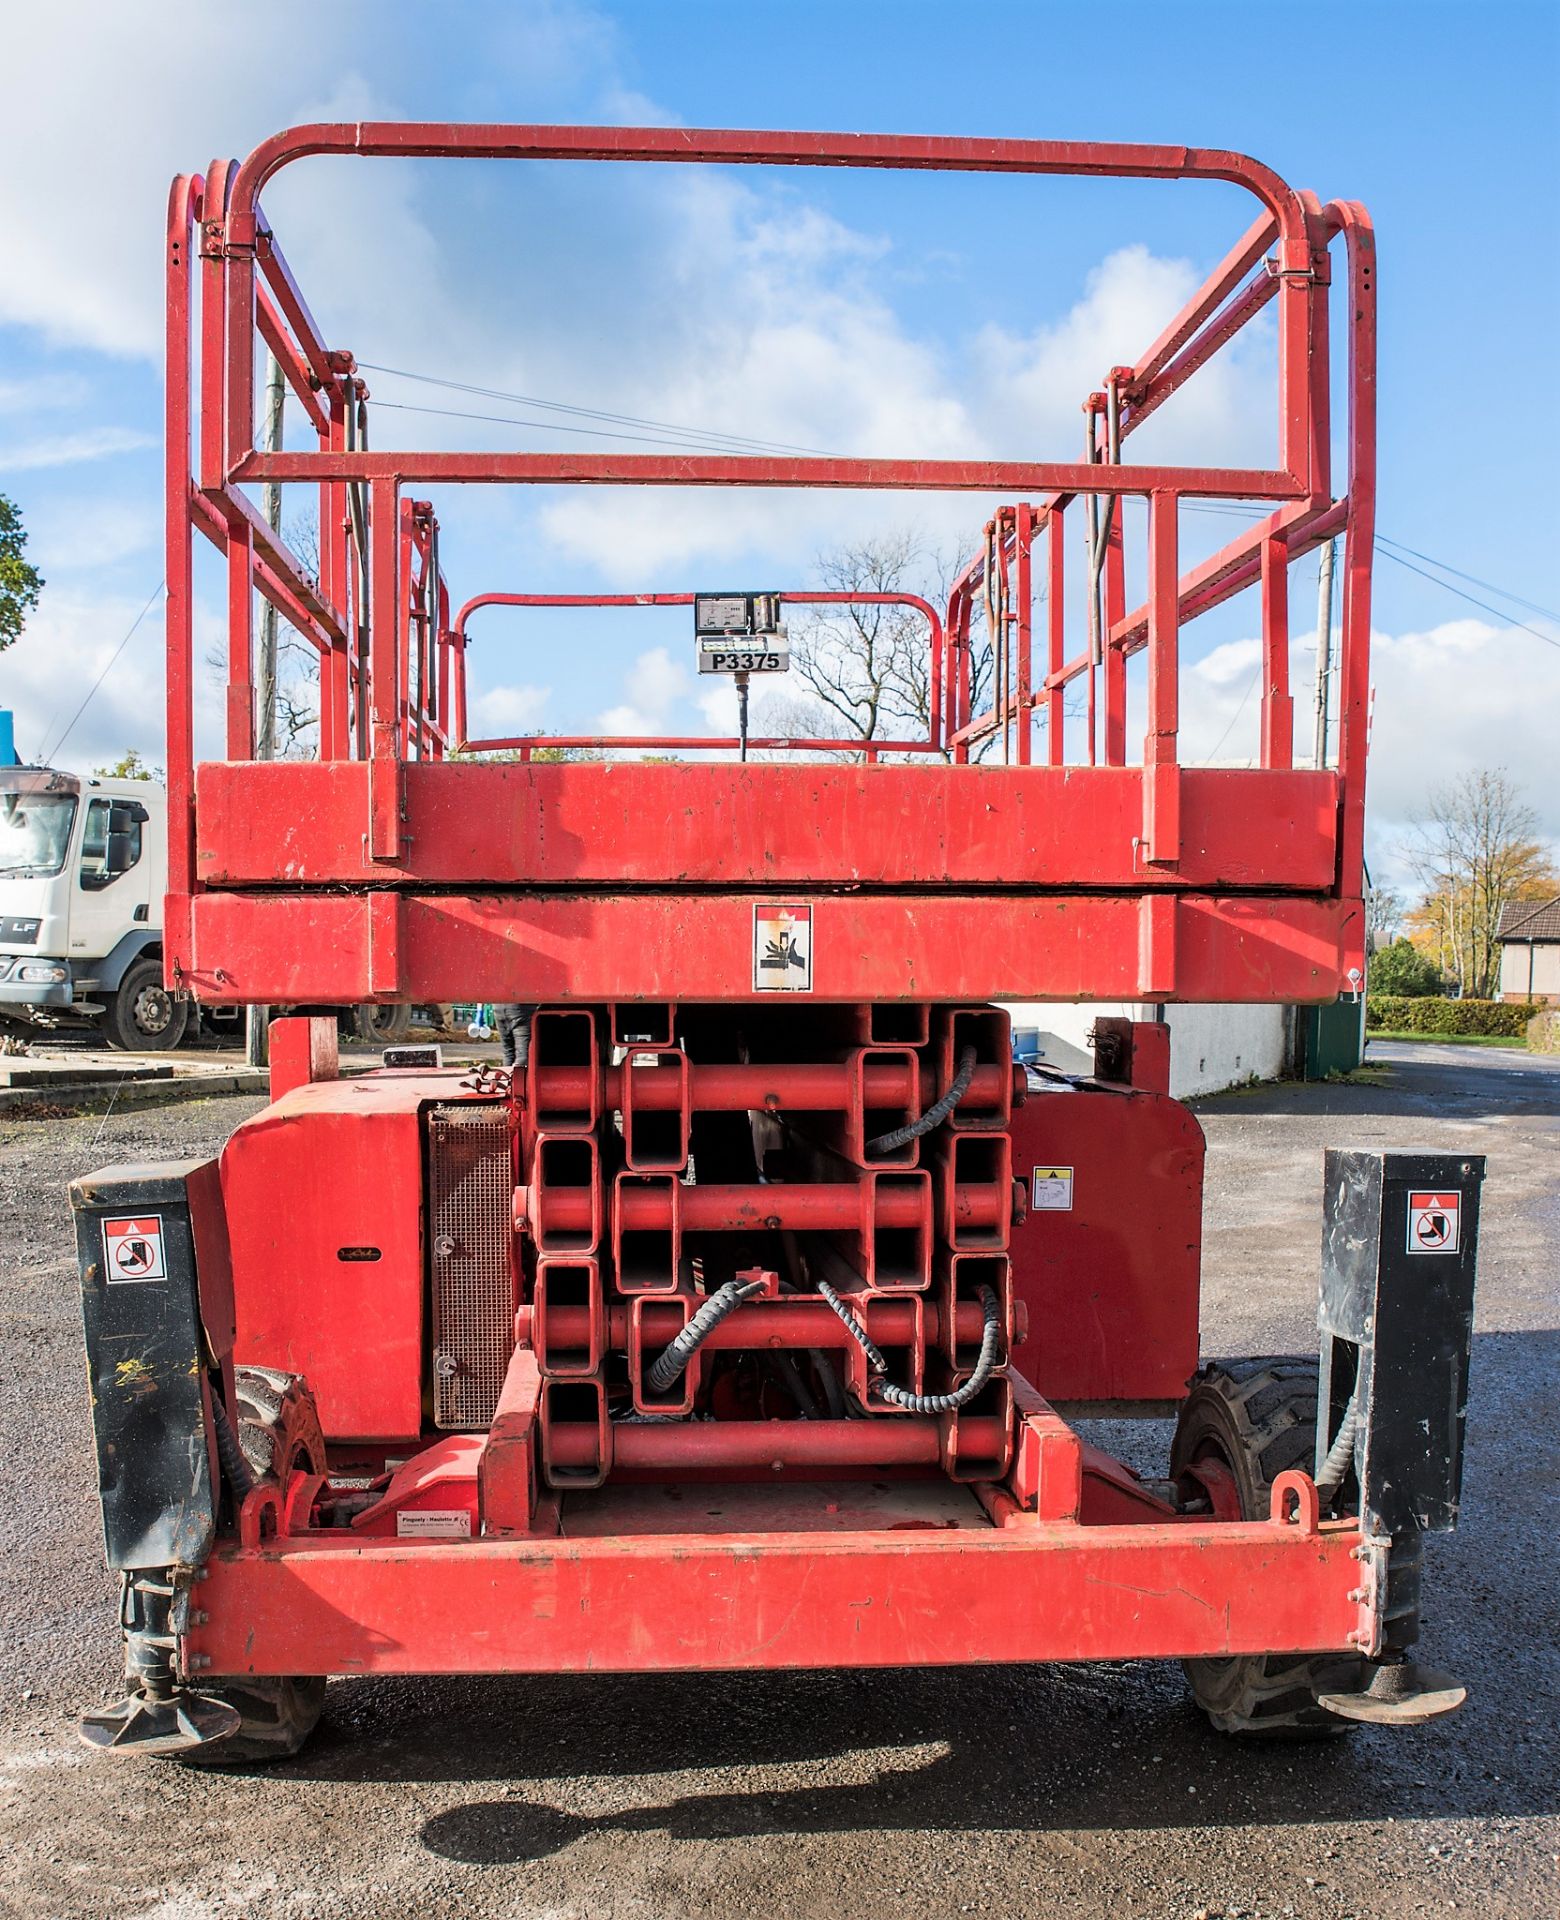 Haulotte H15SX diesel driven scissor lift access platform Year: 2003 S/N: 104436 Recorded Hours: 527 - Image 6 of 10